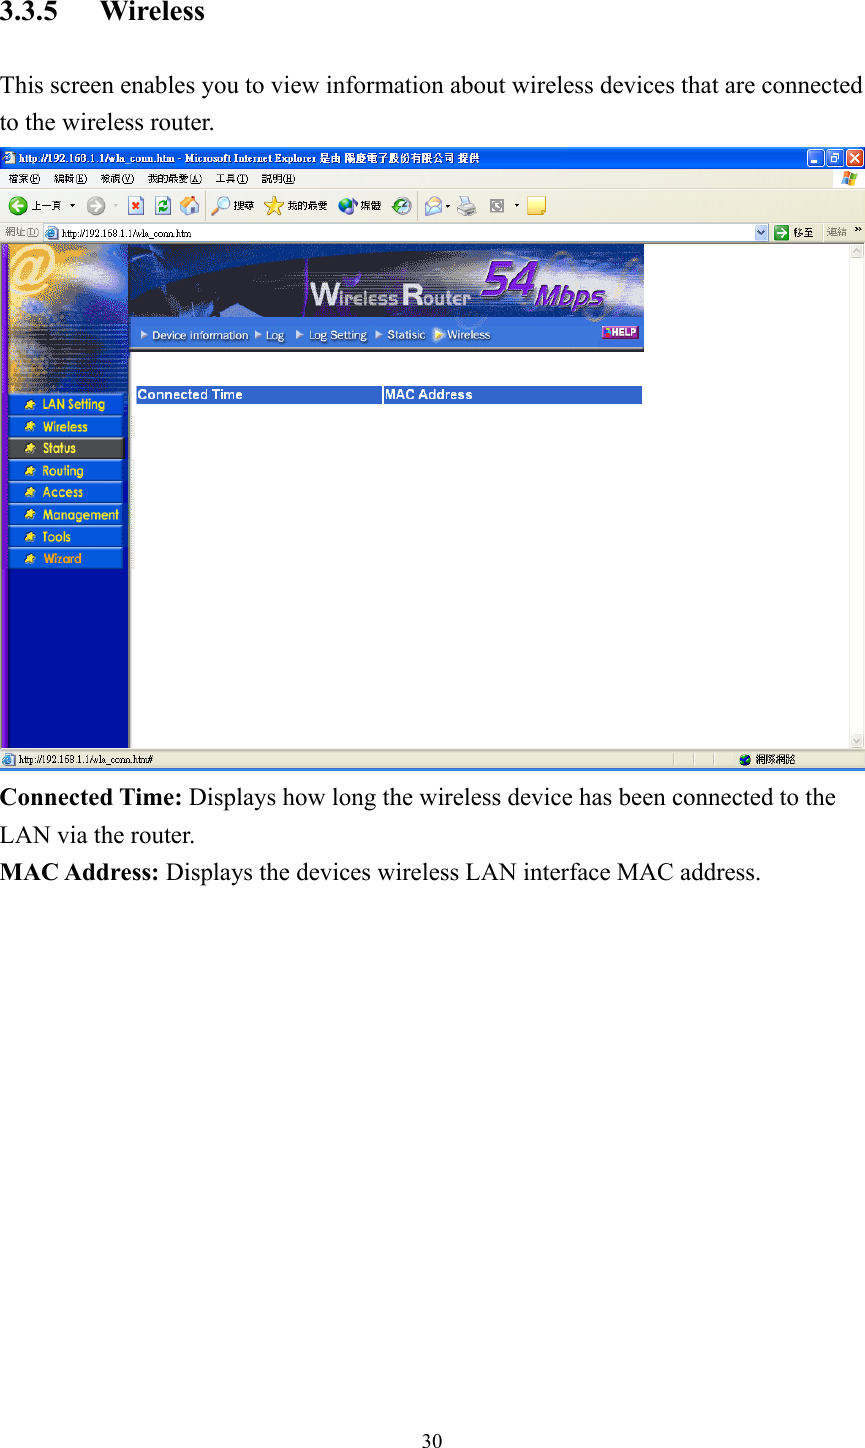 3.3.5 Wireless This screen enables you to view information about wireless devices that are connected to the wireless router.  Connected Time: Displays how long the wireless device has been connected to the LAN via the router. MAC Address: Displays the devices wireless LAN interface MAC address.  30